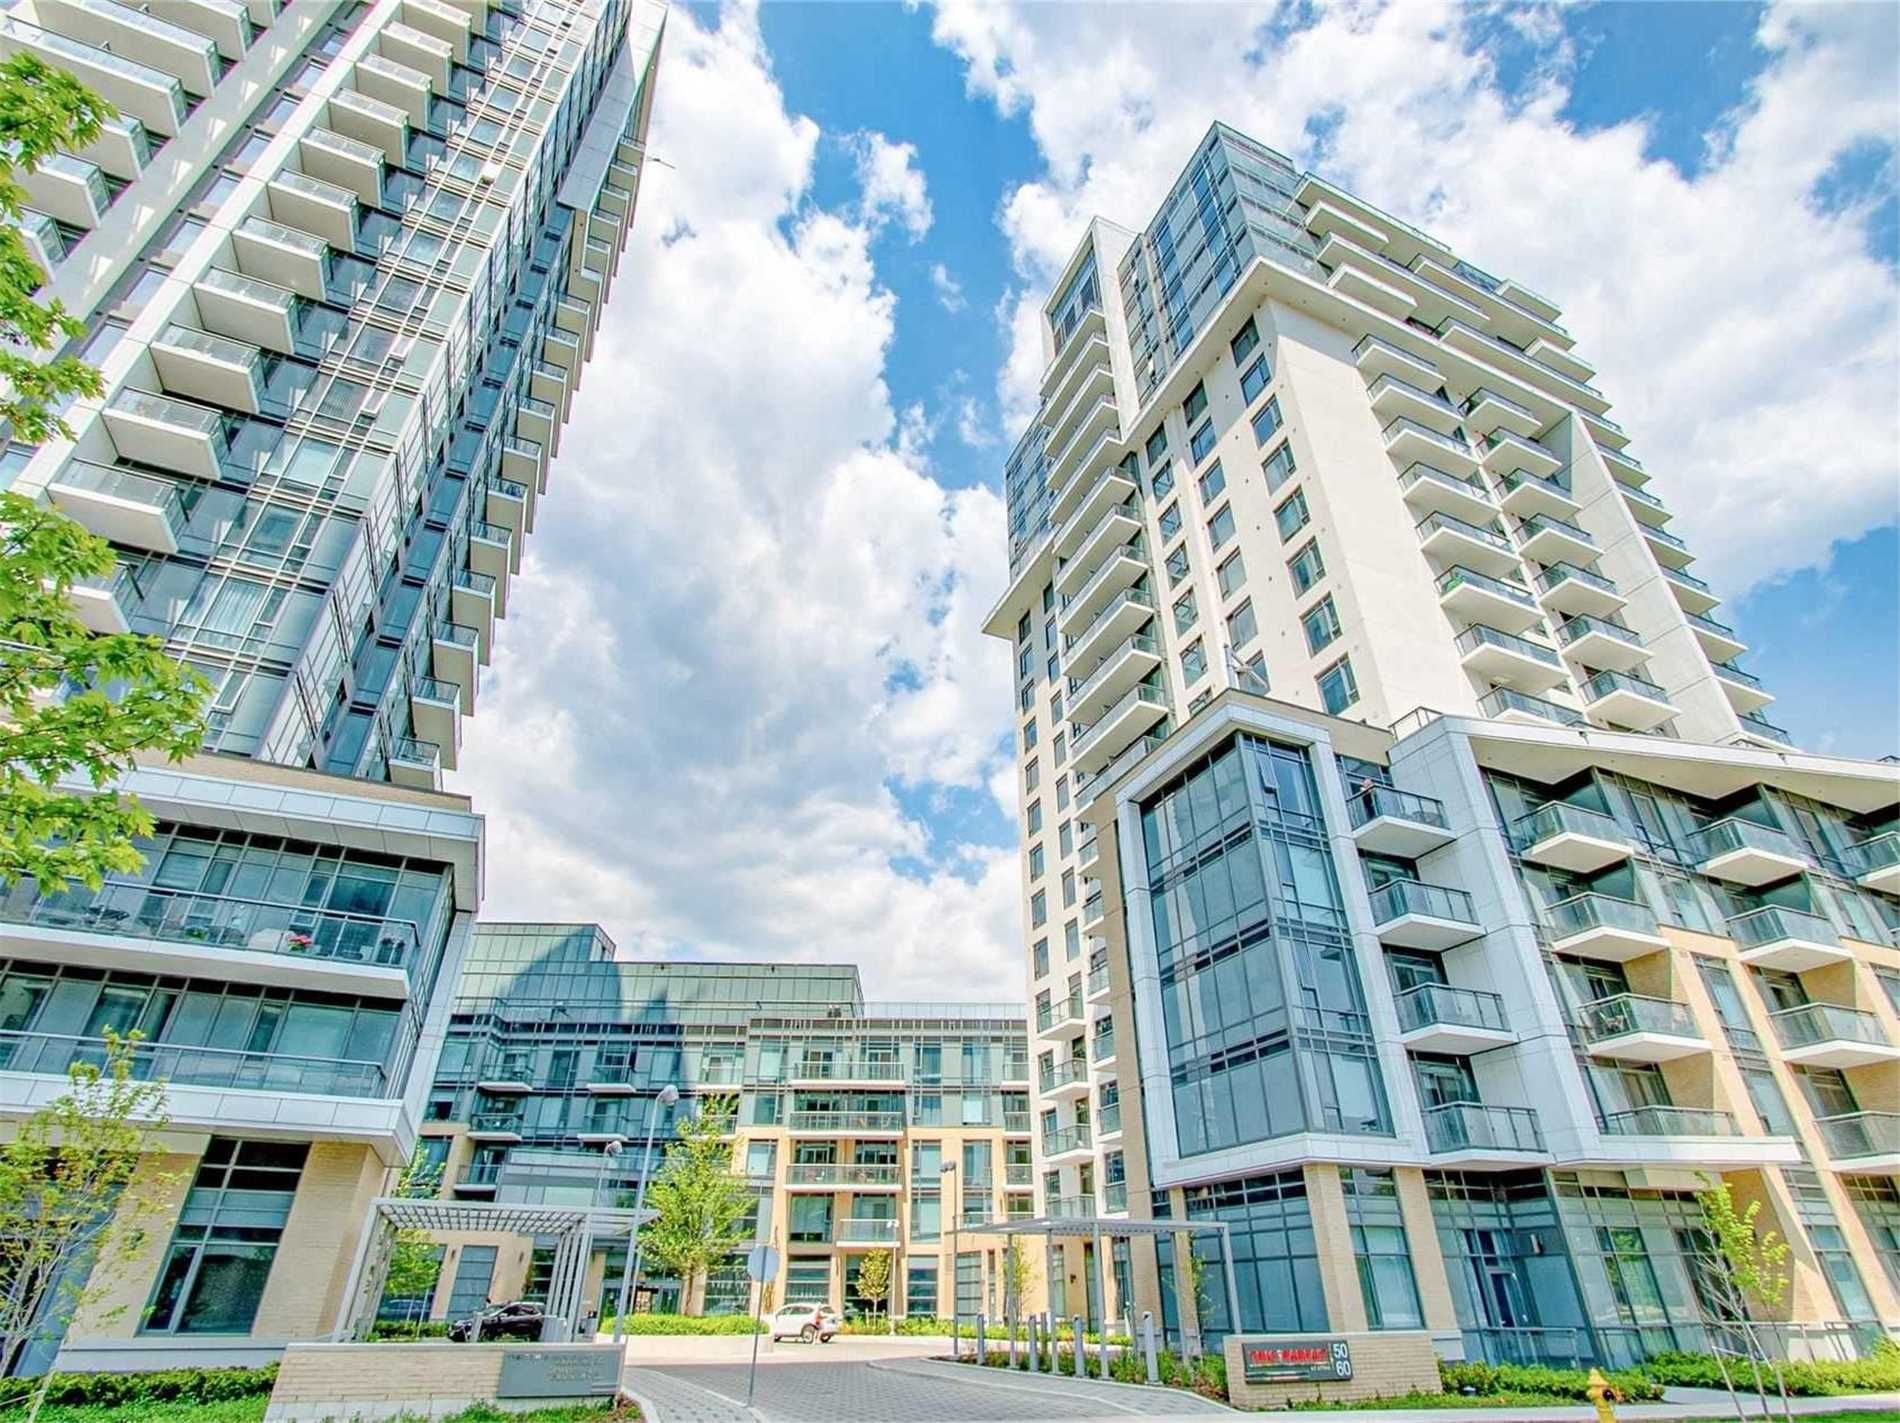 50 Ann O'Reilly Rd. This condo at Parfait at Atria is located in  North York, Toronto - image #2 of 2 by Strata.ca